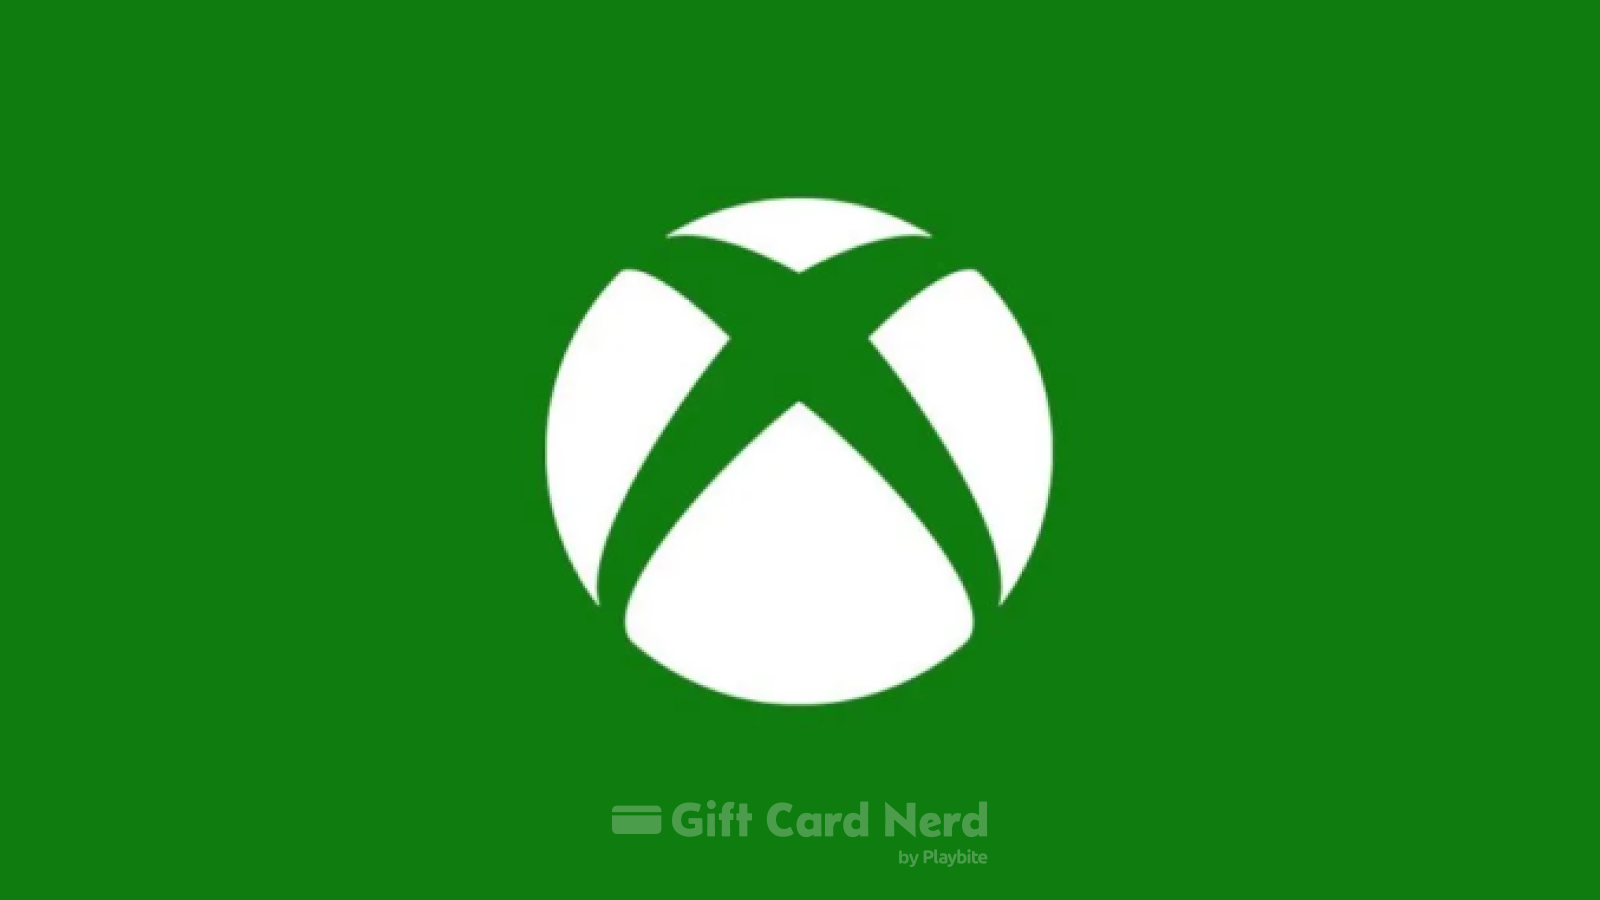 Can I use an Xbox gift card on Apple Wallet?